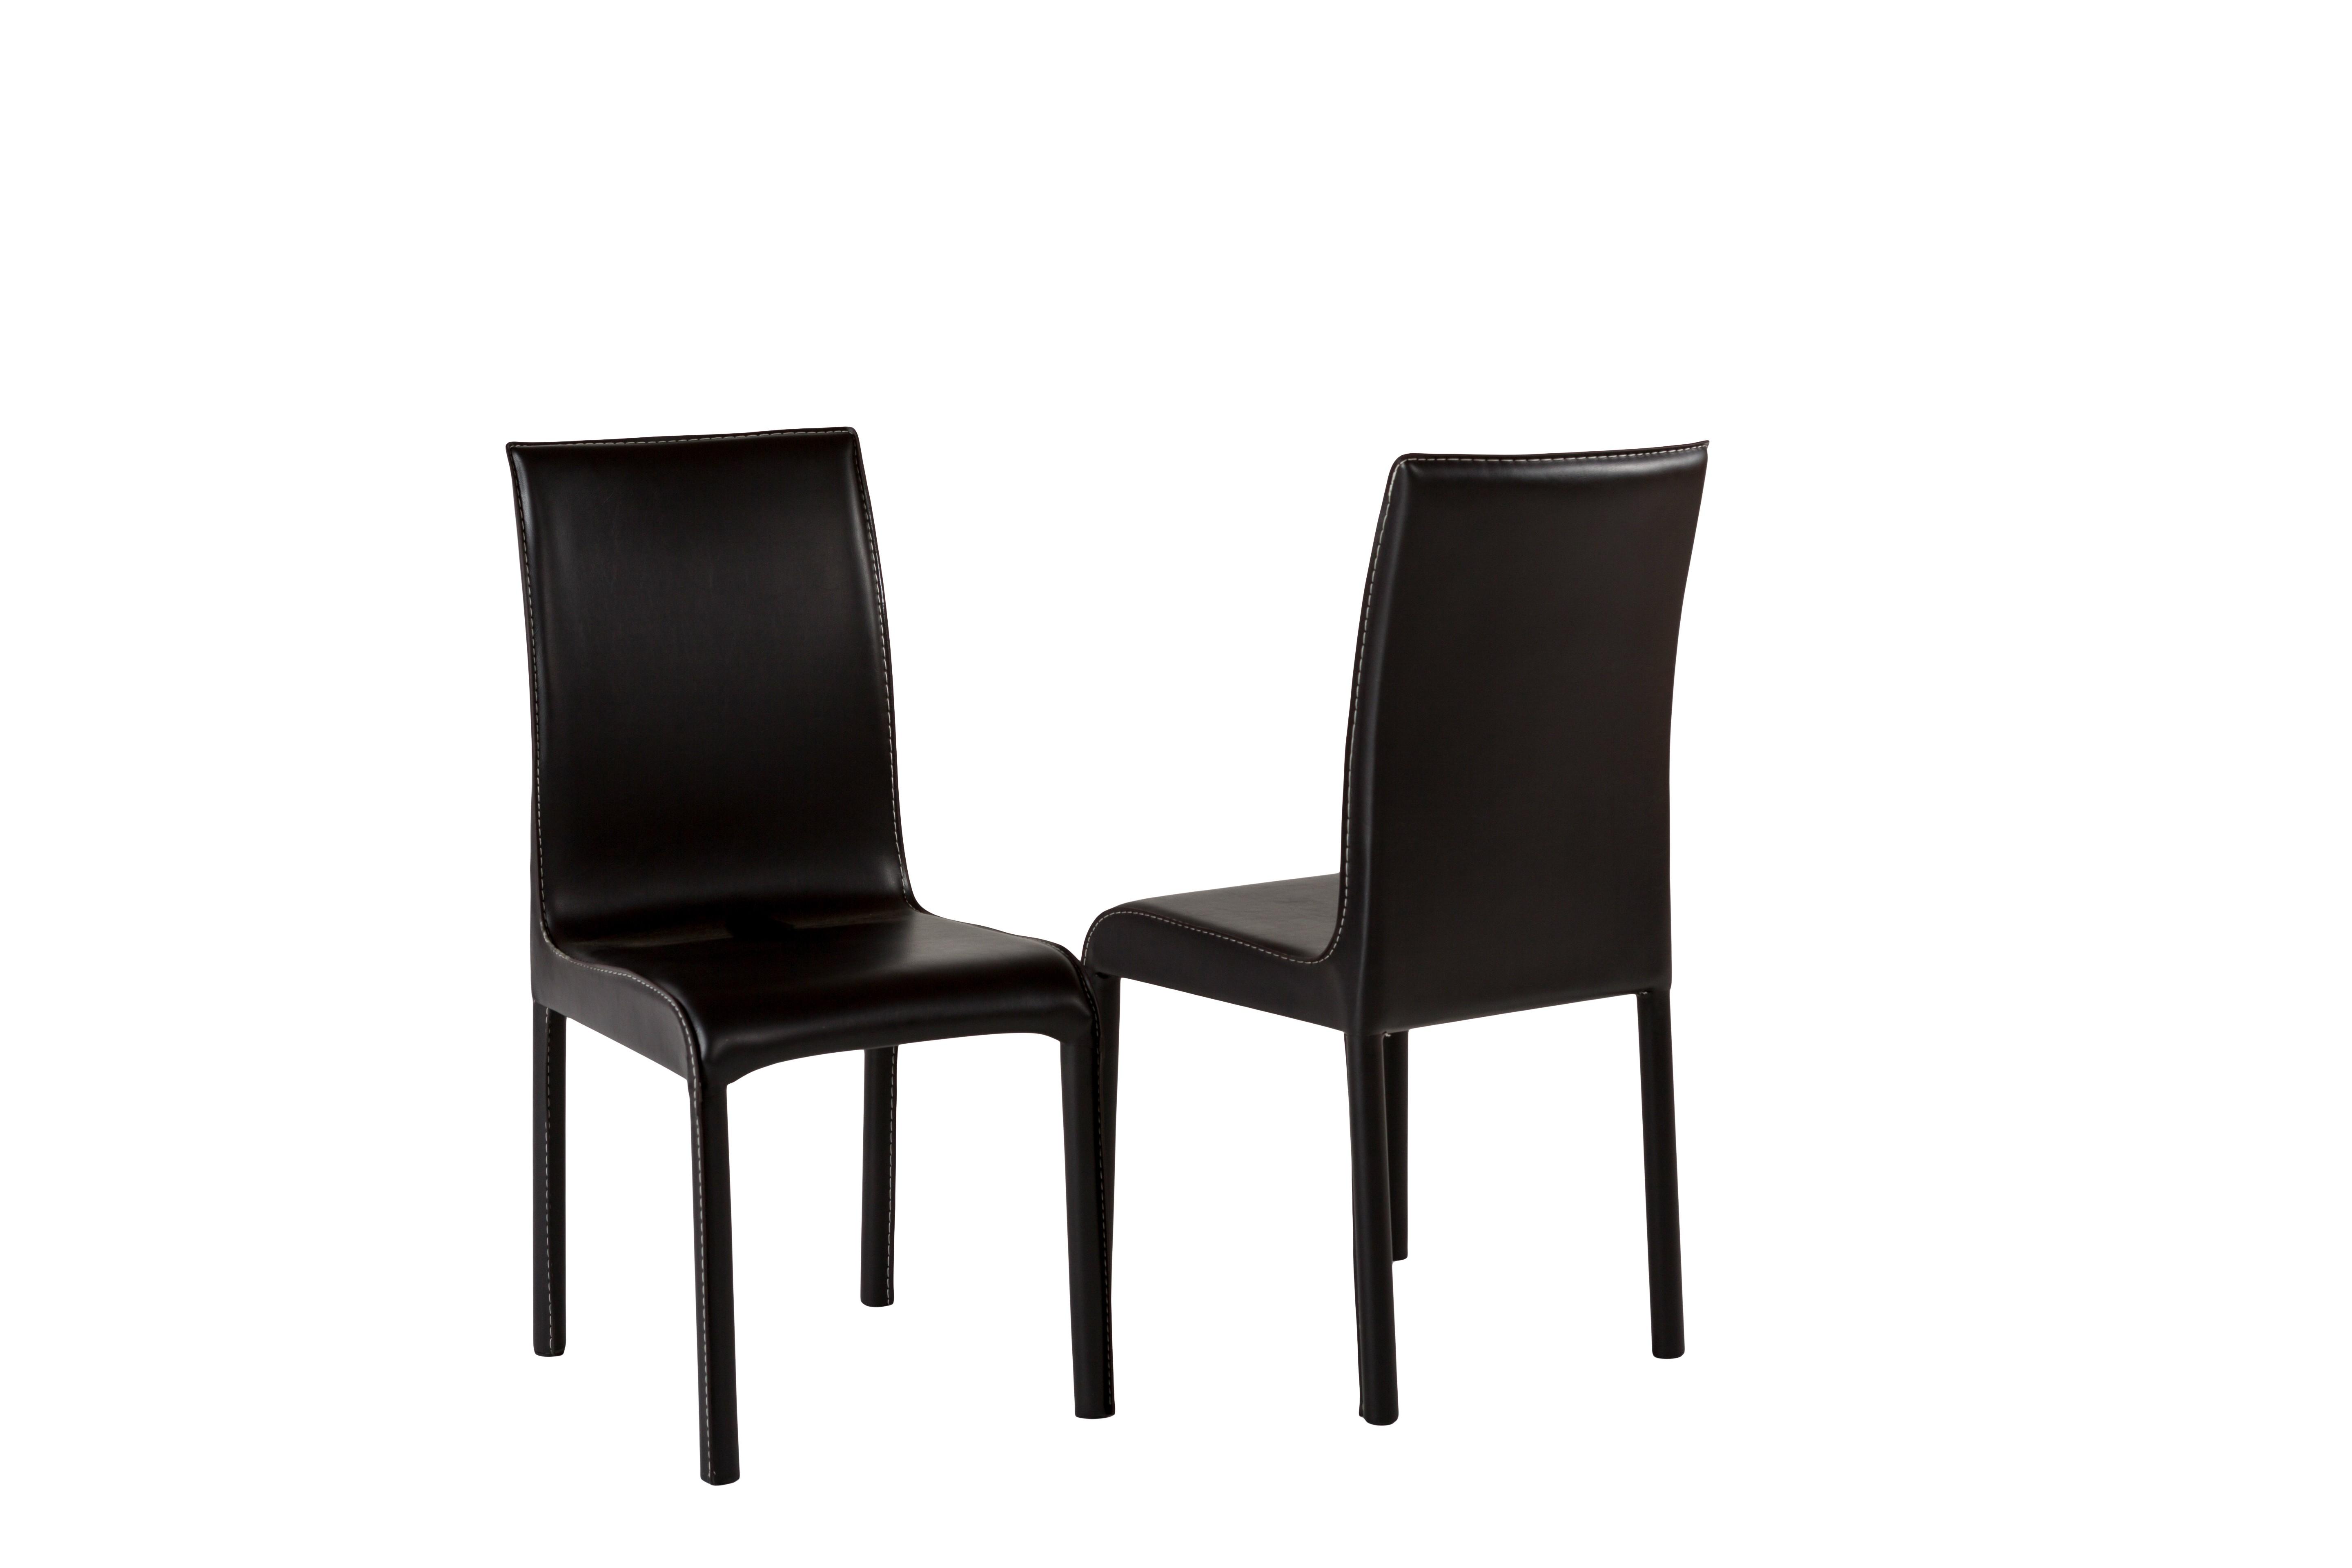 

    
At Home USA Swansea Black Dining Chair Set 6Pcs Contemporary
